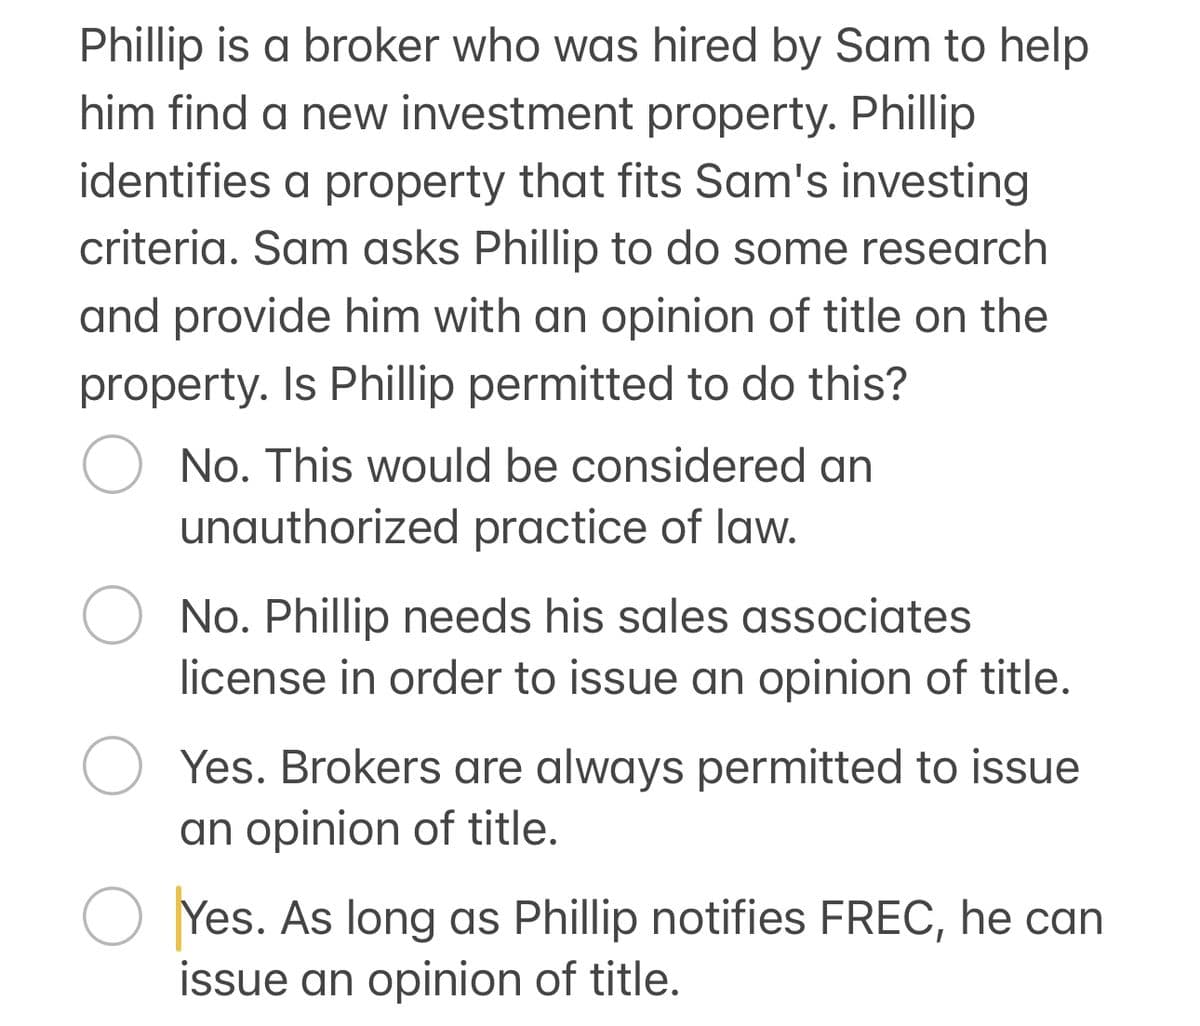 Phillip is a broker who was hired by Sam to help
him find a new investment property. Phillip
identifies a property that fits Sam's investing
criteria. Sam asks Phillip to do some research
and provide him with an opinion of title on the
property. Is Phillip permitted to do this?
○ No. This would be considered an
unauthorized practice of law.
No. Phillip needs his sales associates
license in order to issue an opinion of title.
Yes. Brokers are always permitted to issue
an opinion of title.
Yes. As long as Phillip notifies FREC, he can
issue an opinion of title.